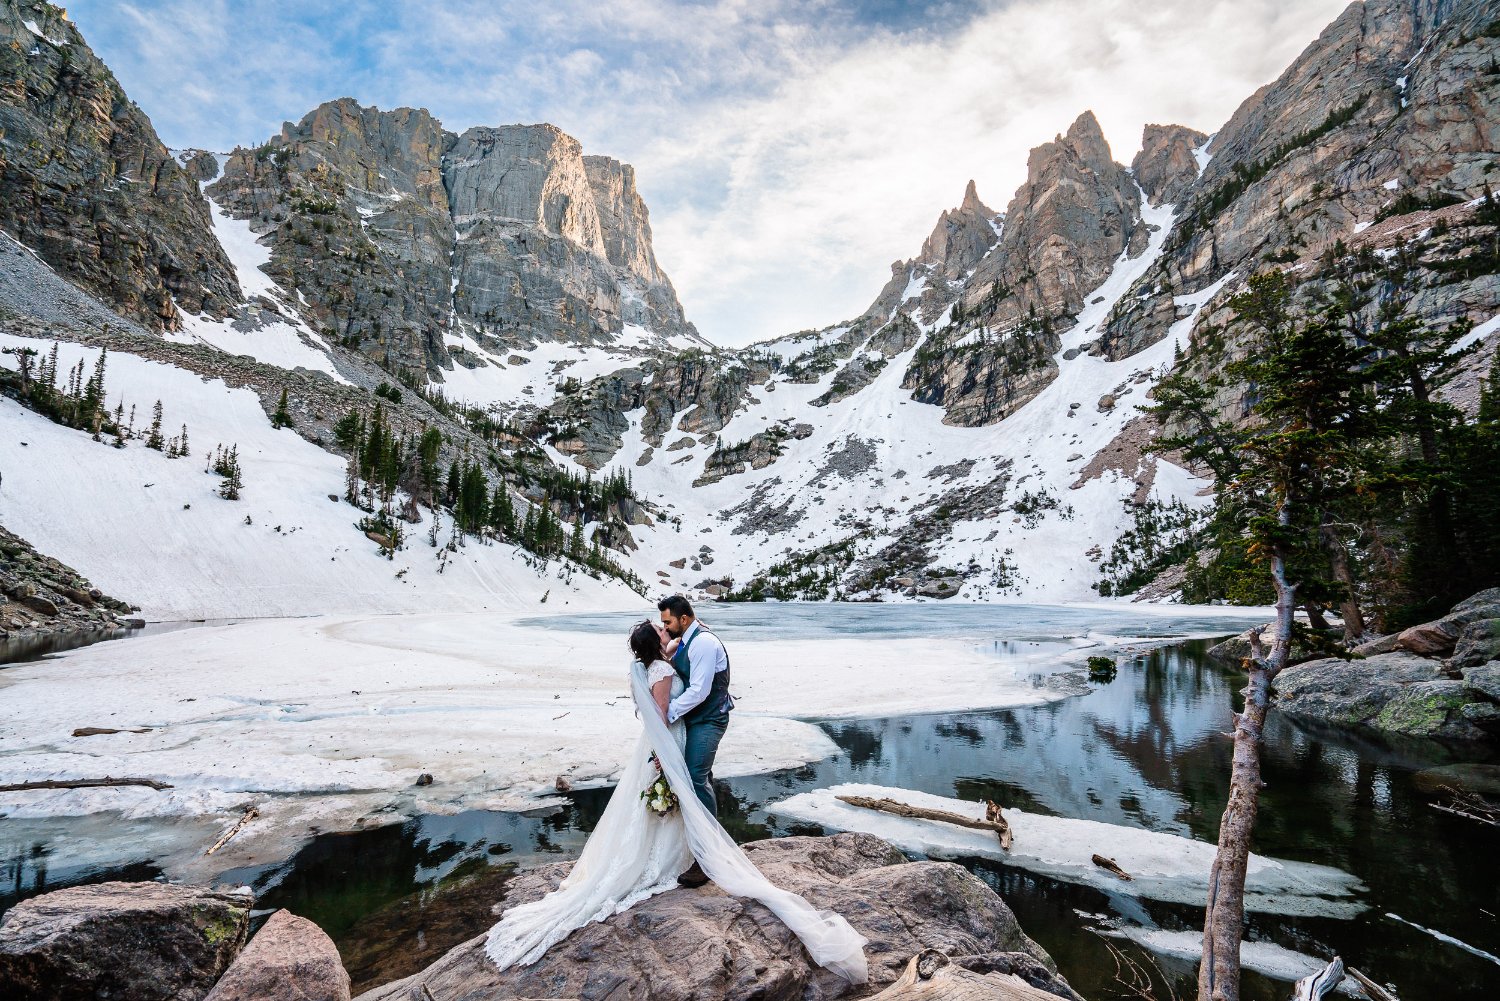 Stunning elopement photos of a bride and groom standing on rocks near a picturesque lake in the mountains.